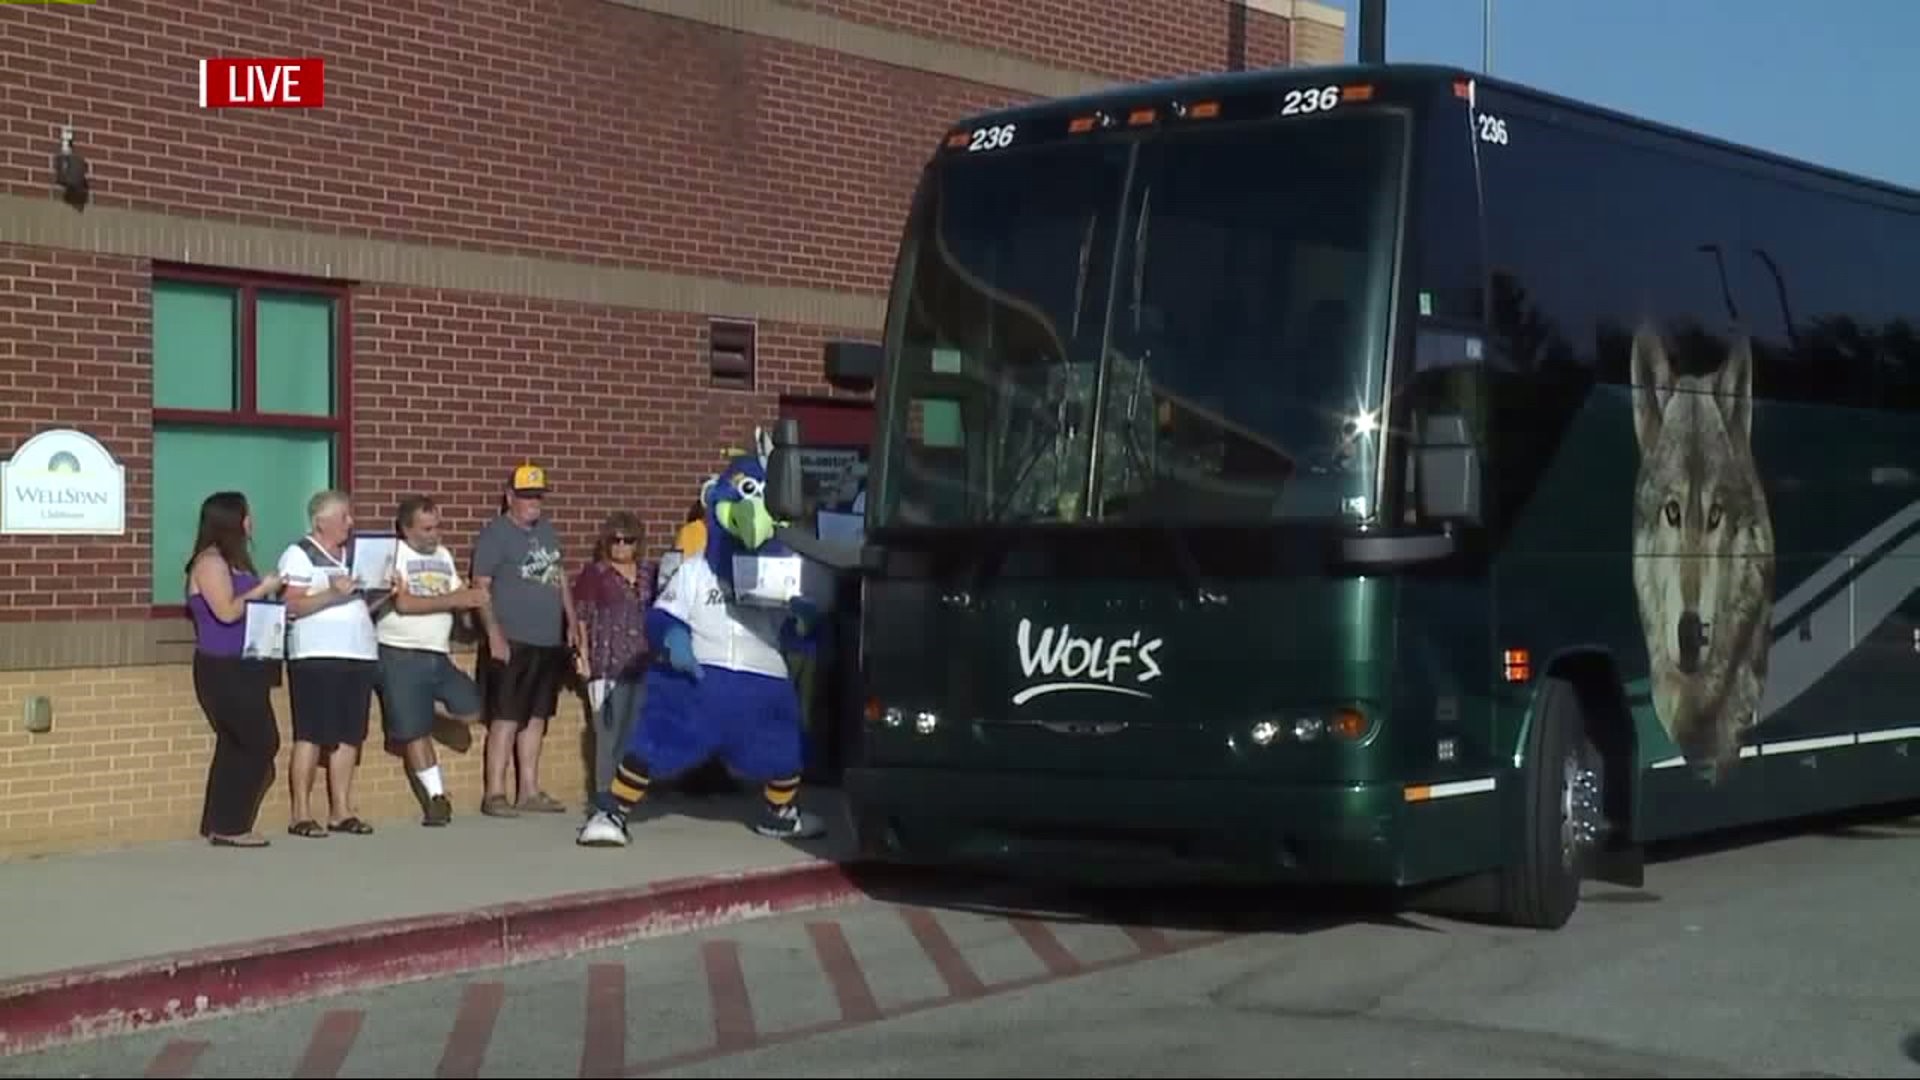 We caught up with the York Revolution and their fans as they get ready to leave for the Atlantic League Championship